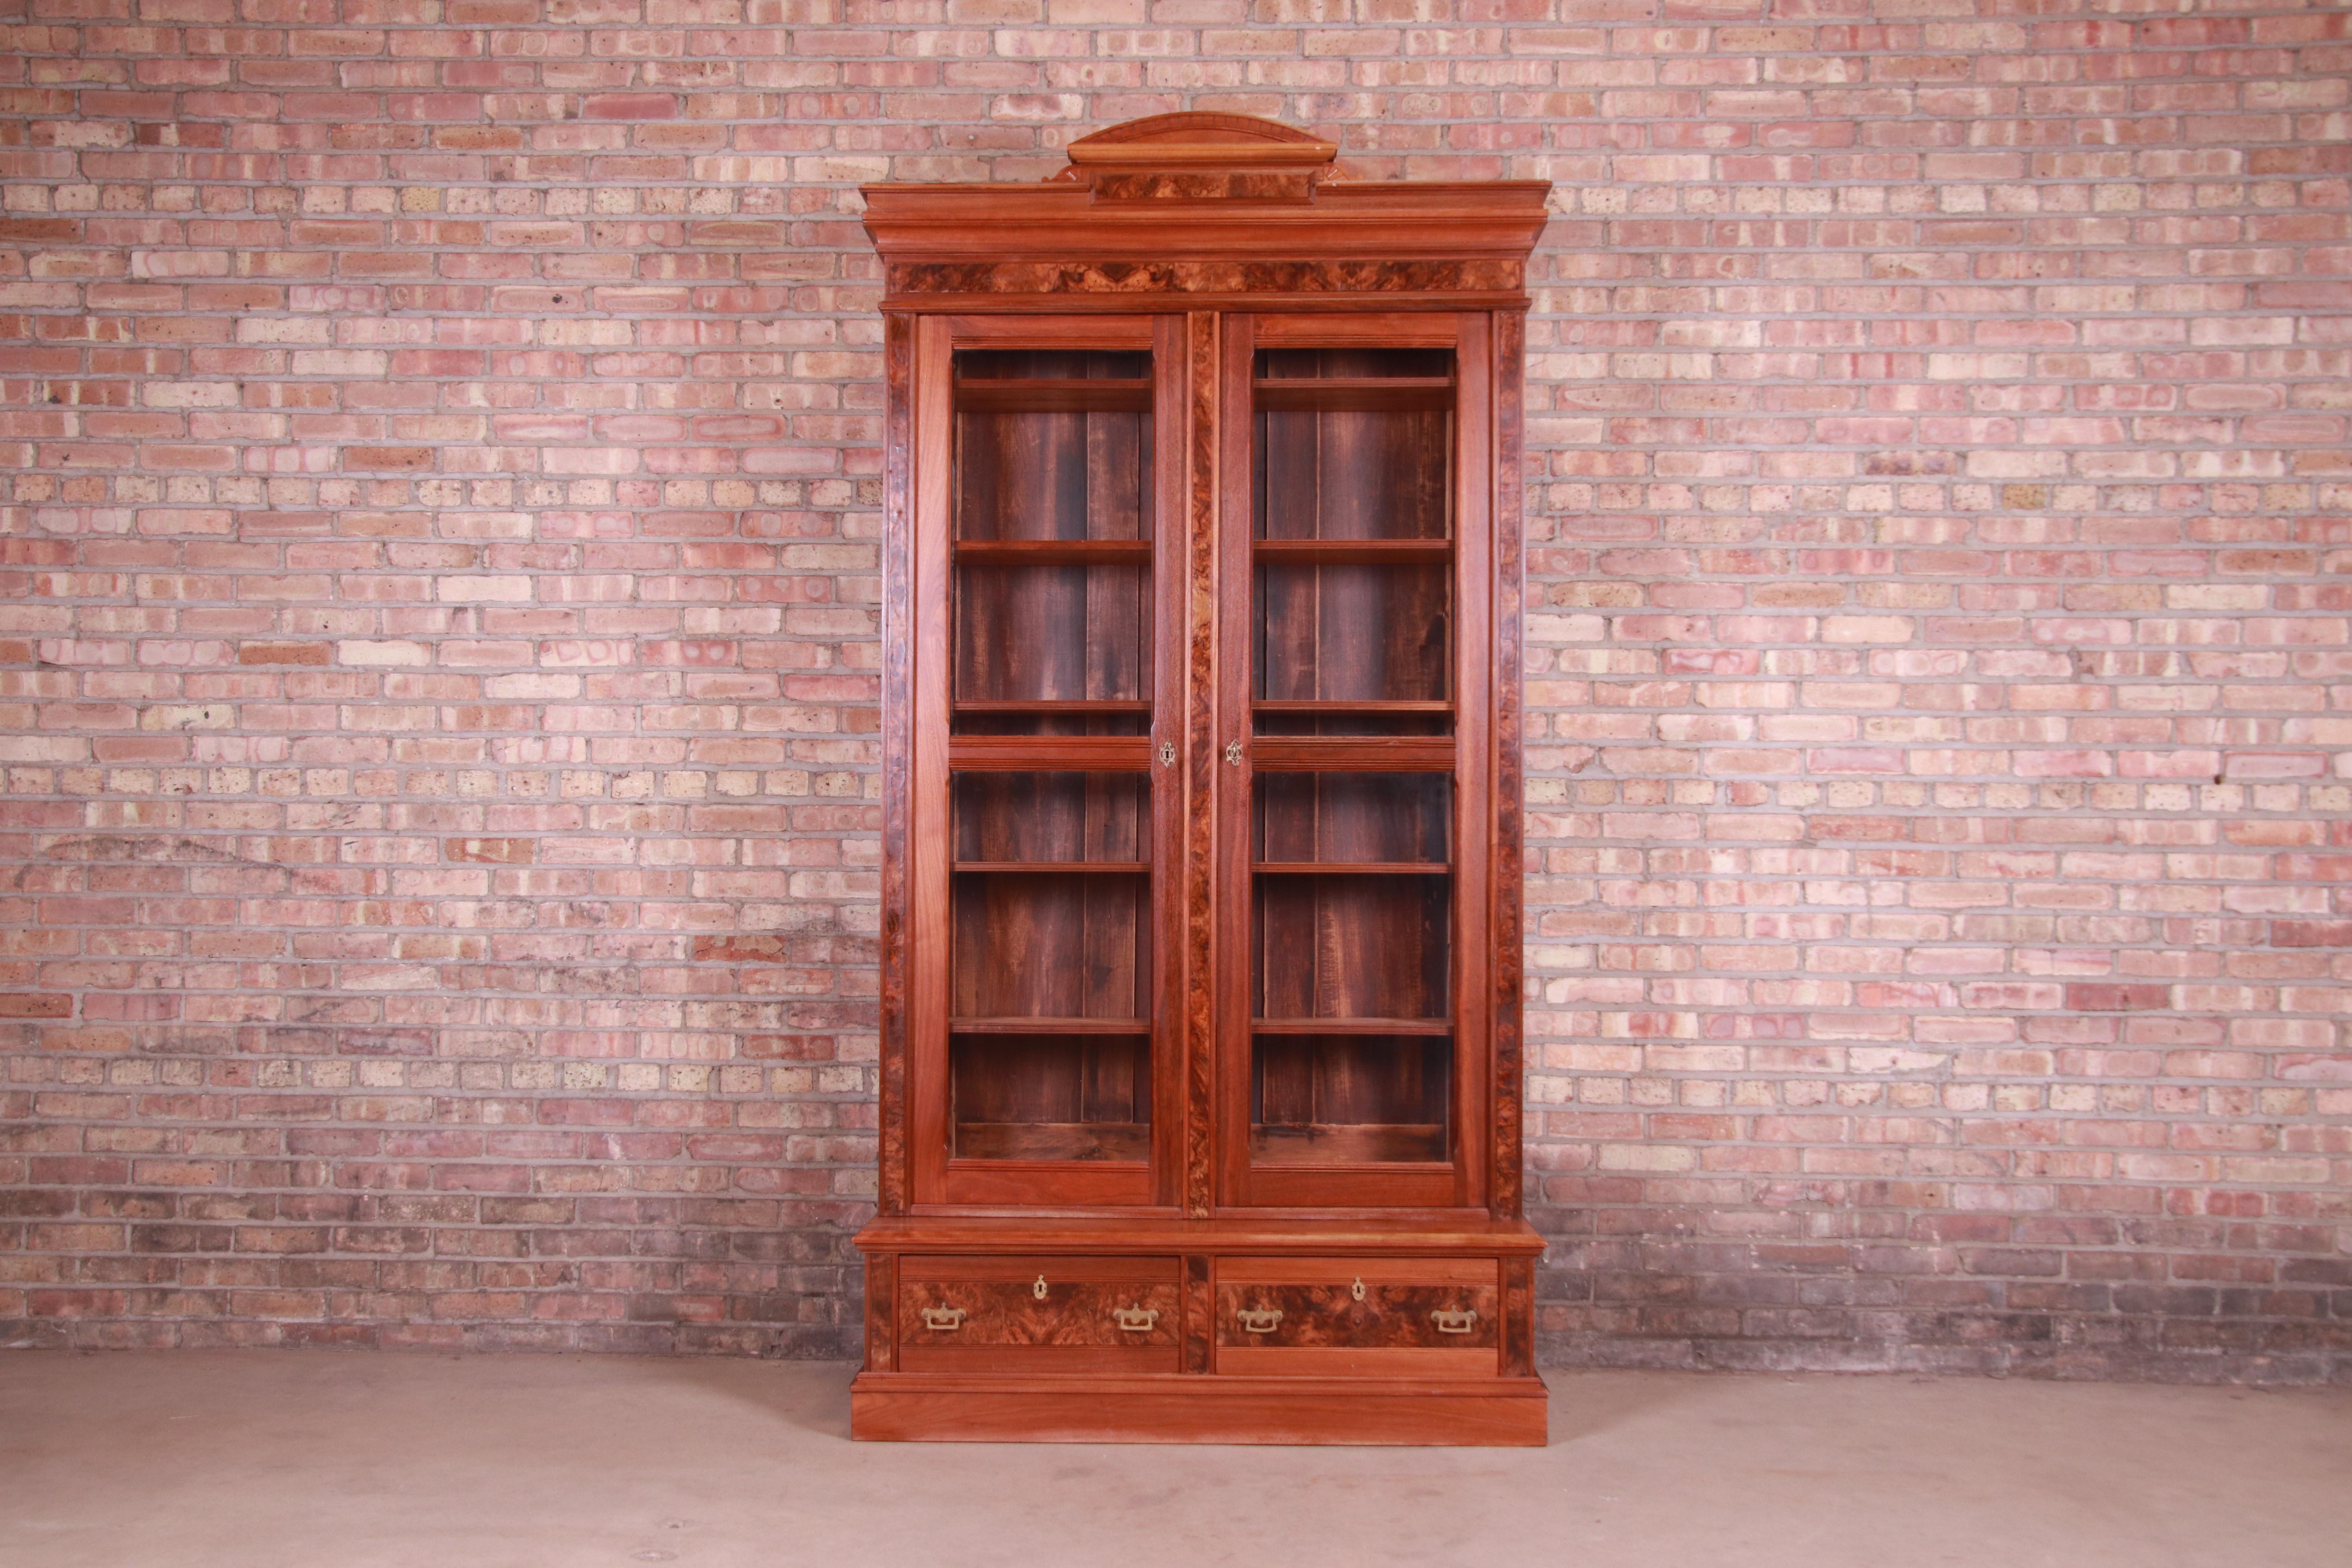 An exceptional antique monumental Eastlake Victorian bookcase

USA, circa 1860s

Carved walnut, with burled walnut front and original brass hardware.

Measures: 50